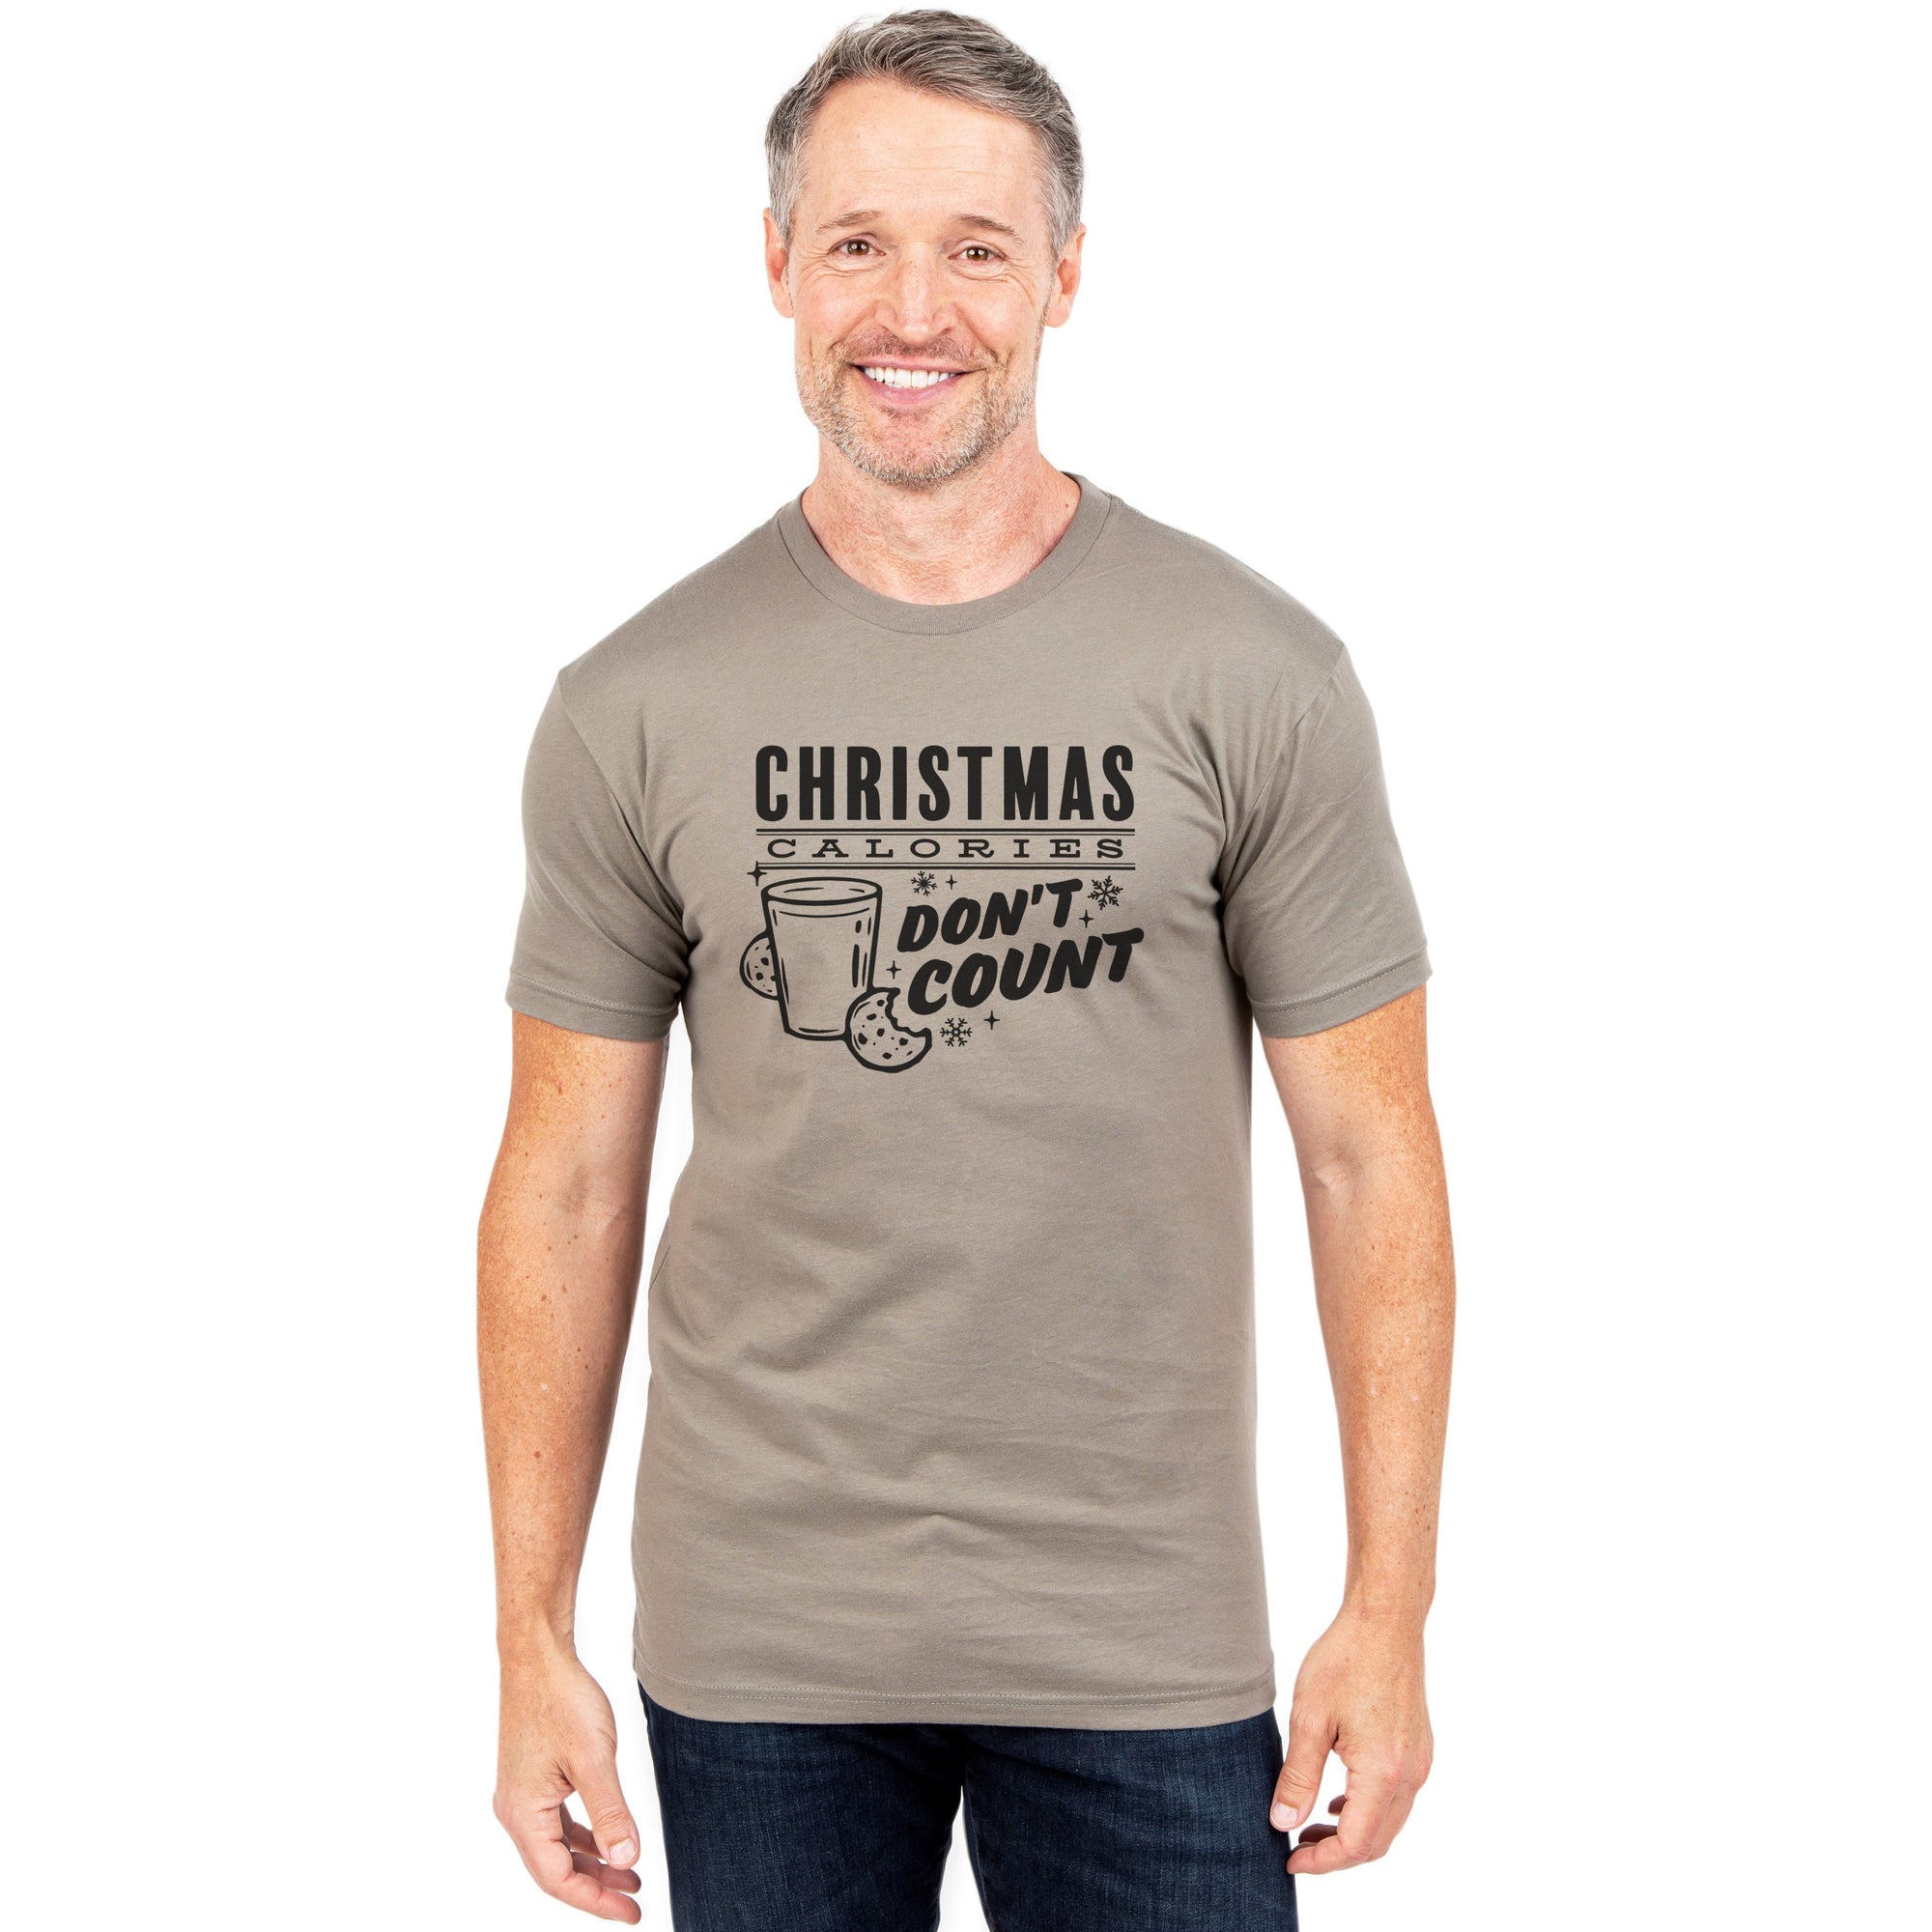 Christmas Calories Don't Count Military Grey Printed Graphic Men's Crew T-Shirt Tee Model